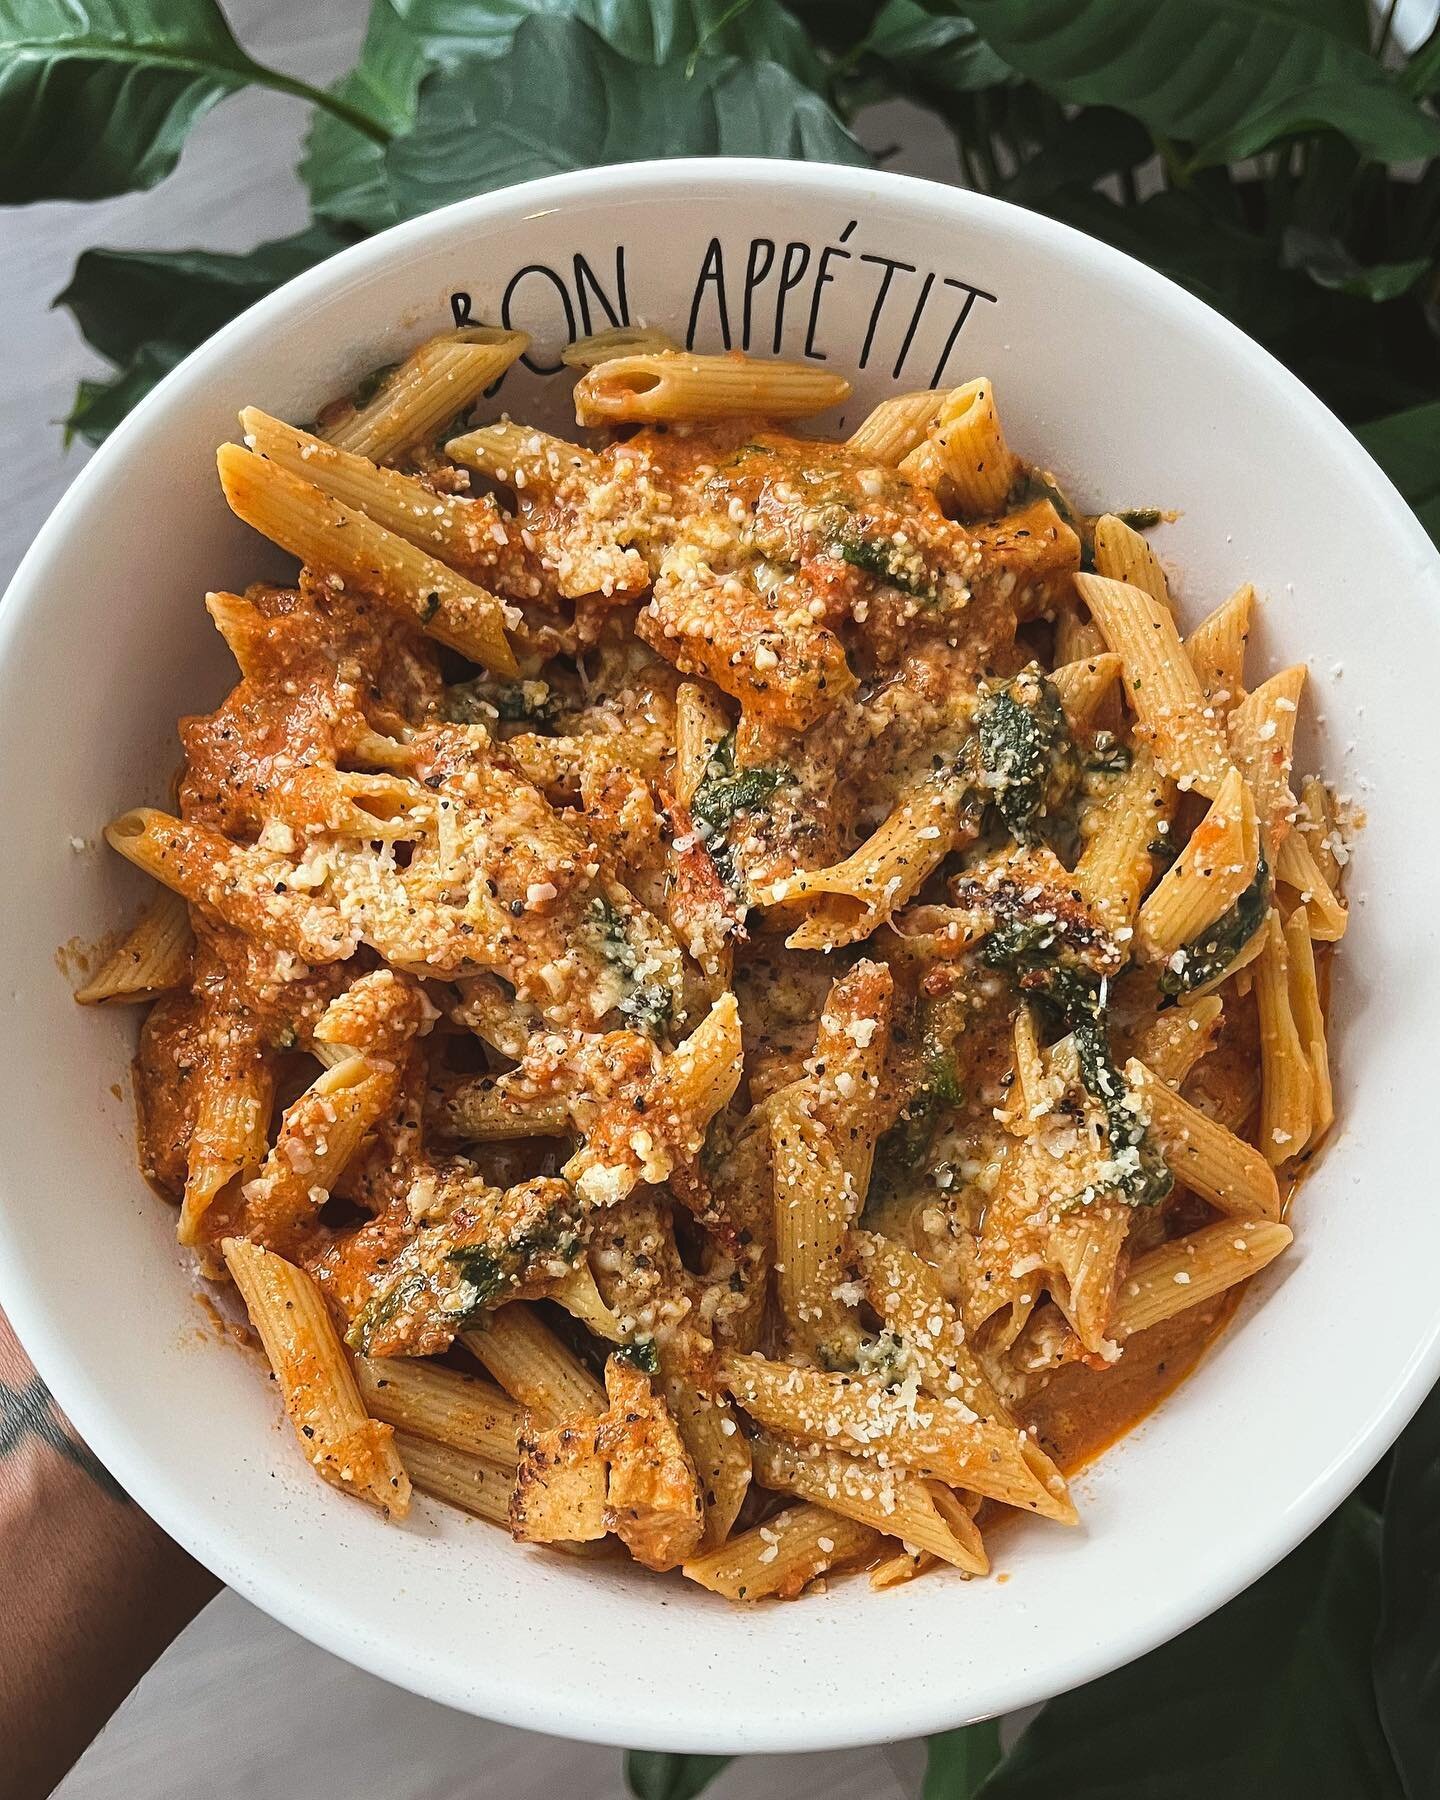 high protein pasta:

- @eatbanza penne pasta
- grilled chicken (seasoned w/ @savorspiceco spicy garlic + herb salt)
- saut&eacute;ed spinach
- spicy vodka sauce (recipe on my page from 9/2021)
- topped w/ grated parmesan + fresh cracked pepper

#prot